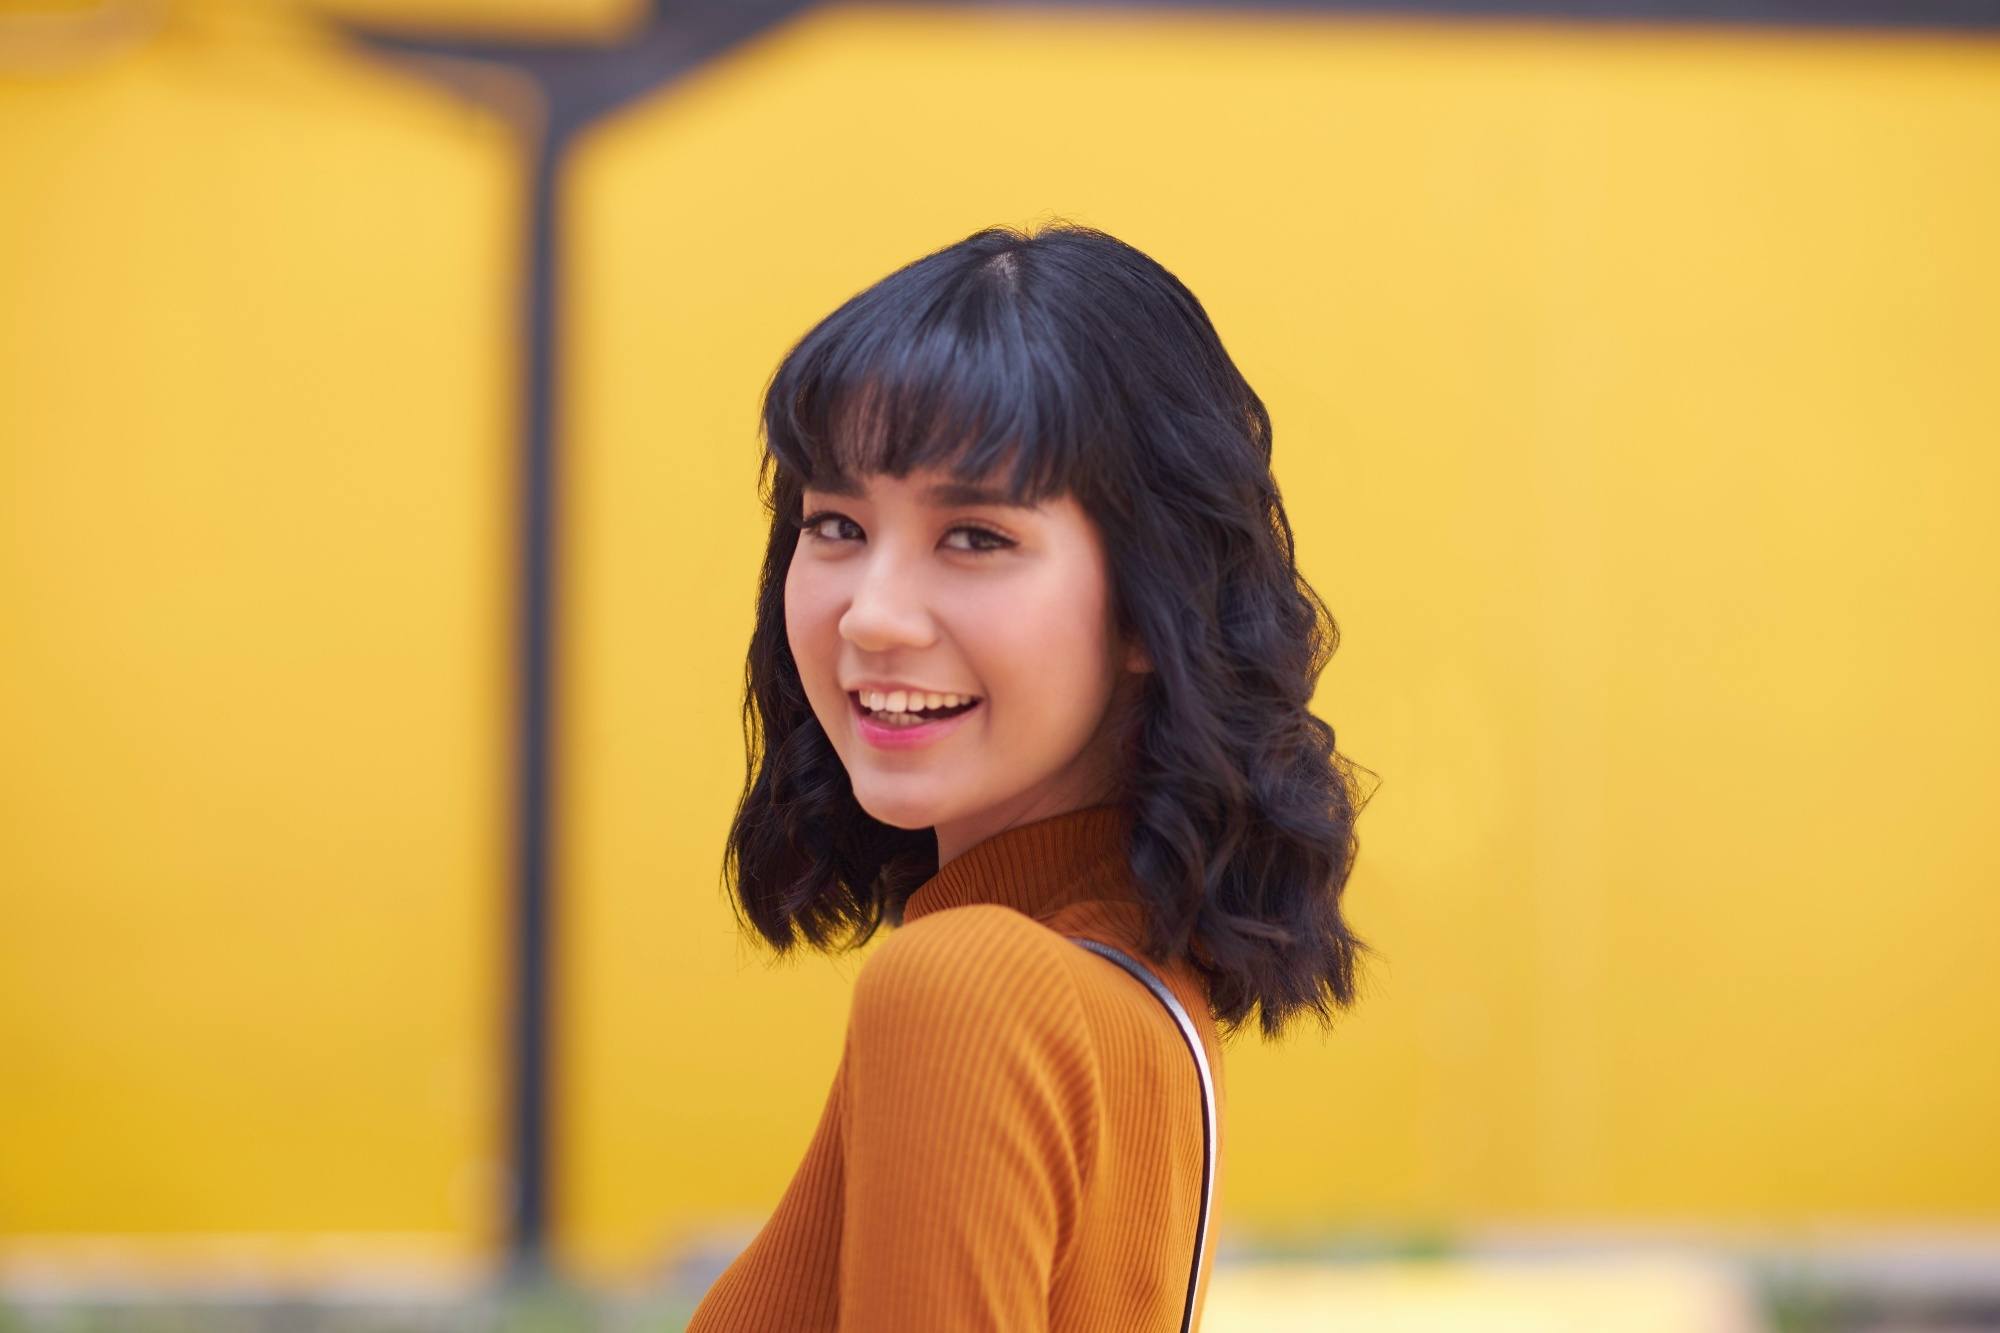 Asian woman with curly short hair with bangs wearing a mustard top